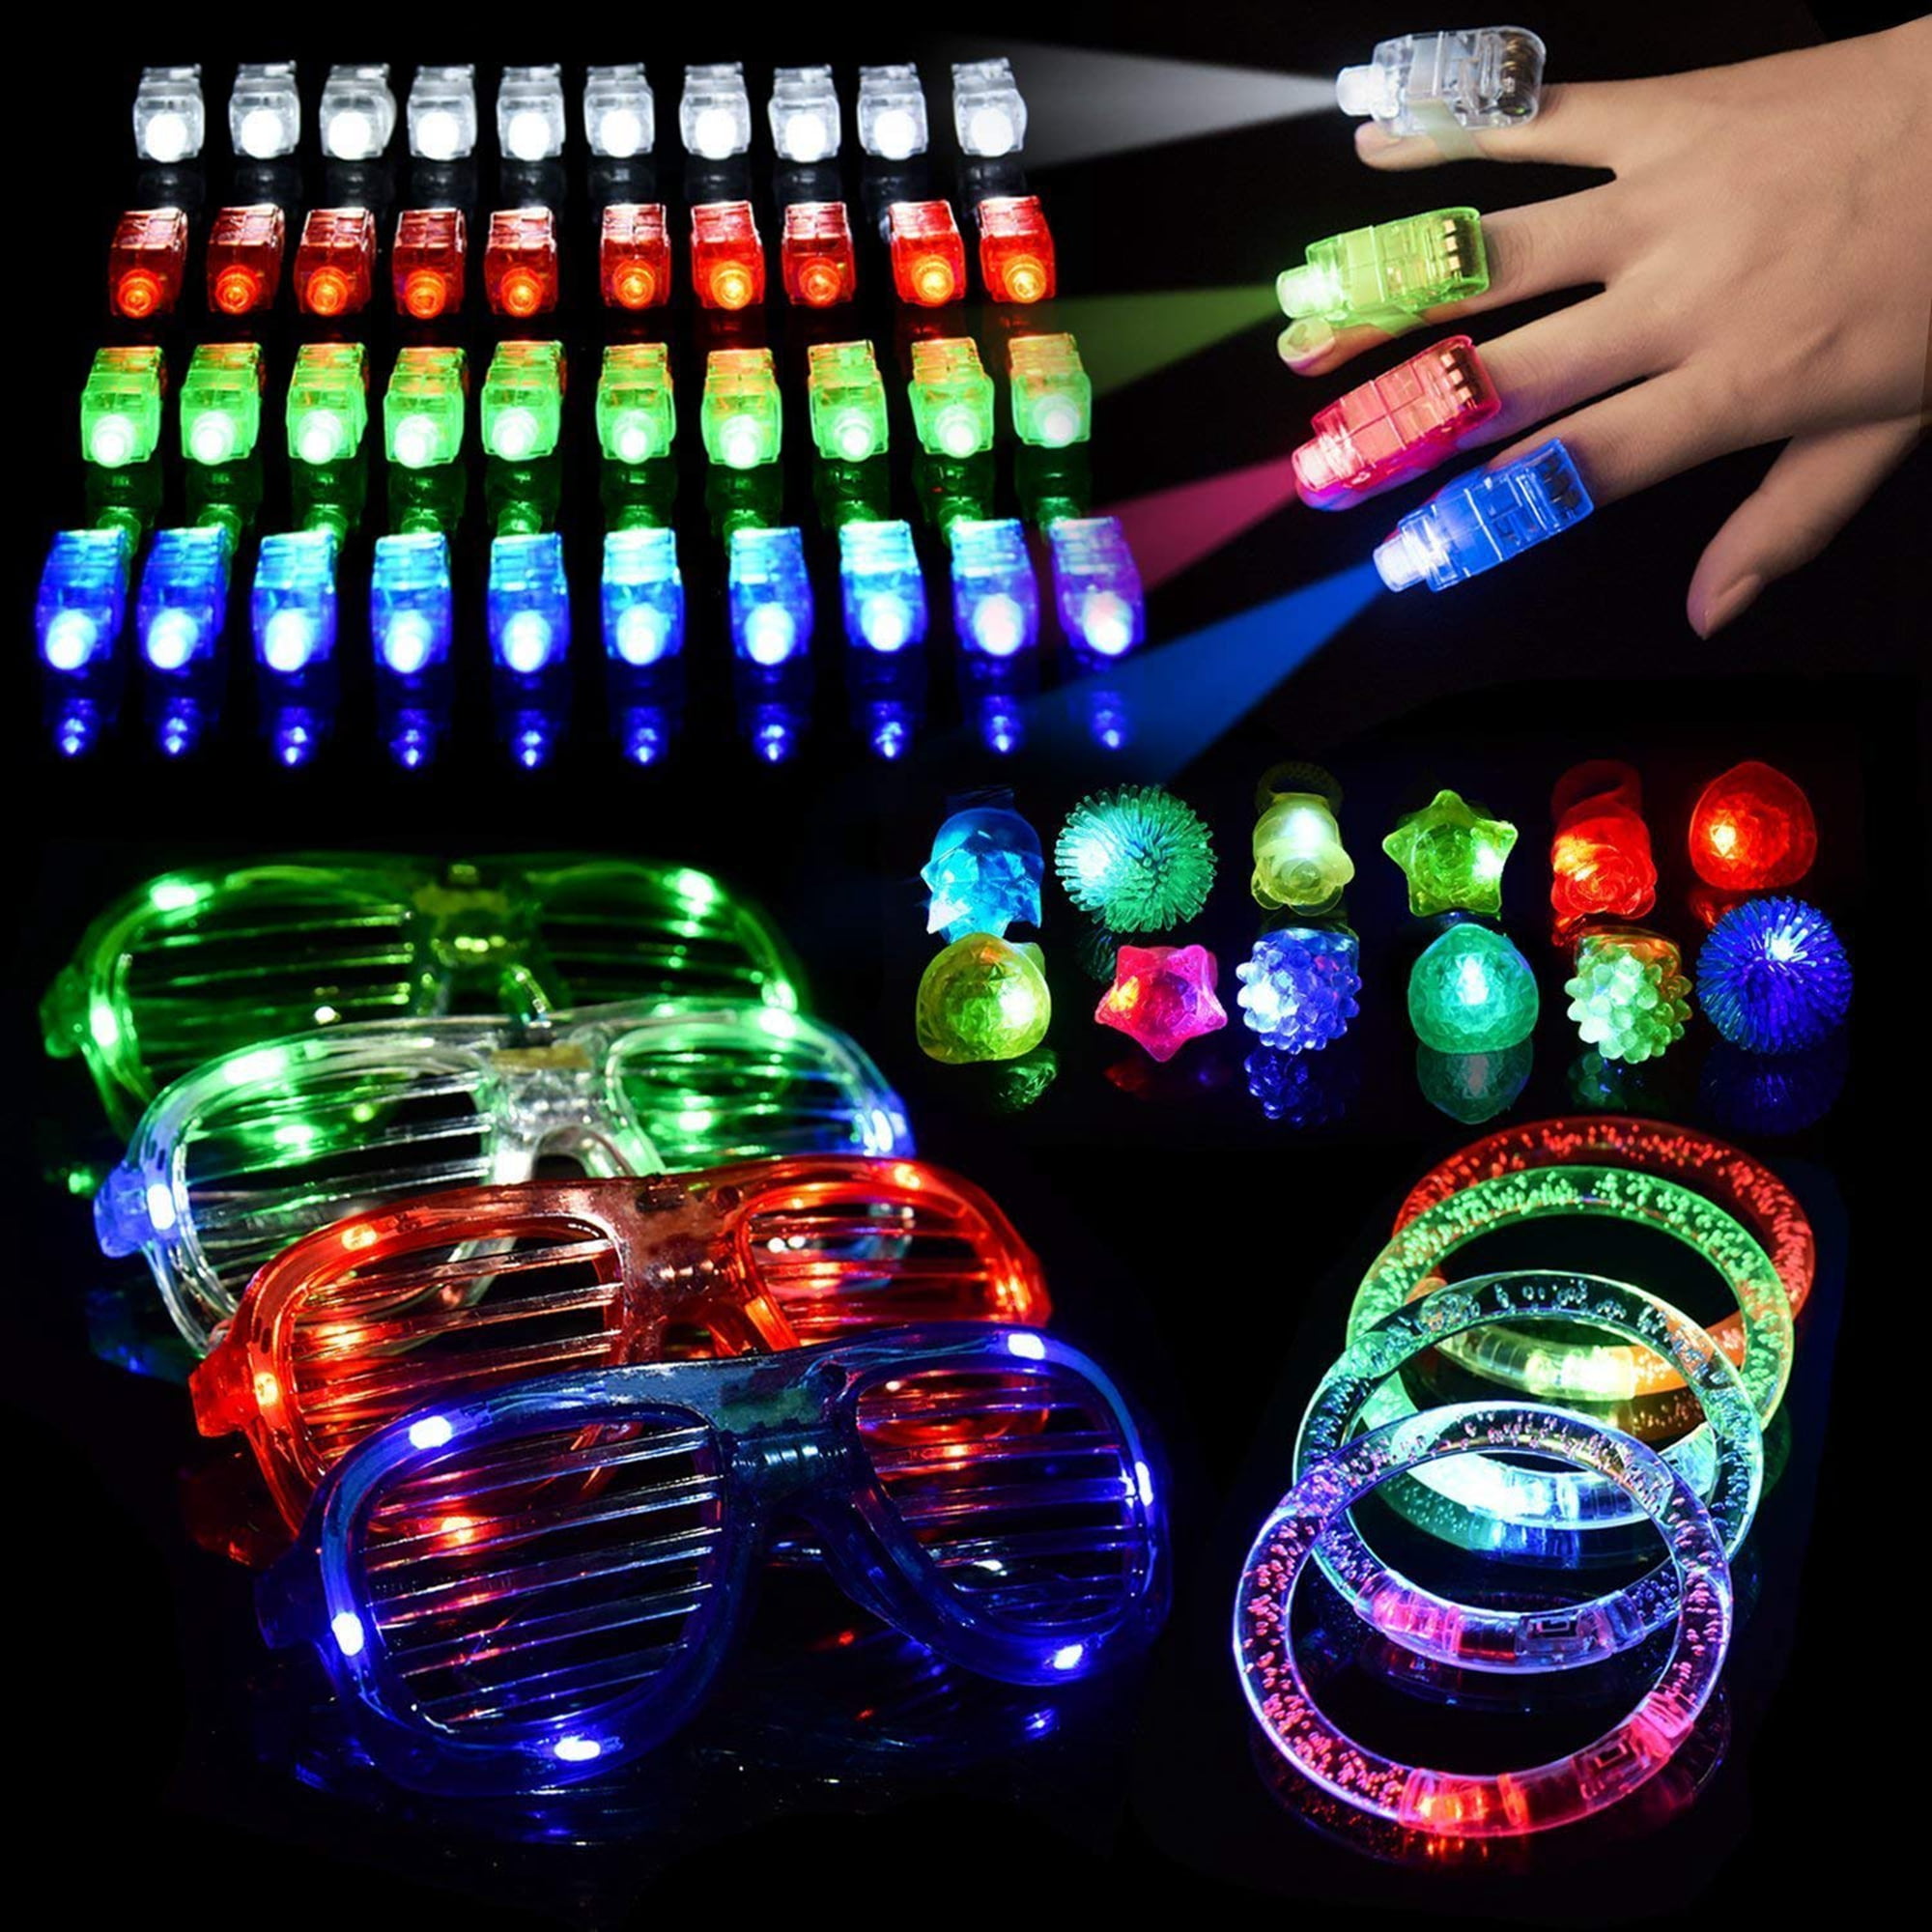 Retro Game Mibote 70Pcs Led Light Up Toys Party Favors Glow In The Dark Supplies 